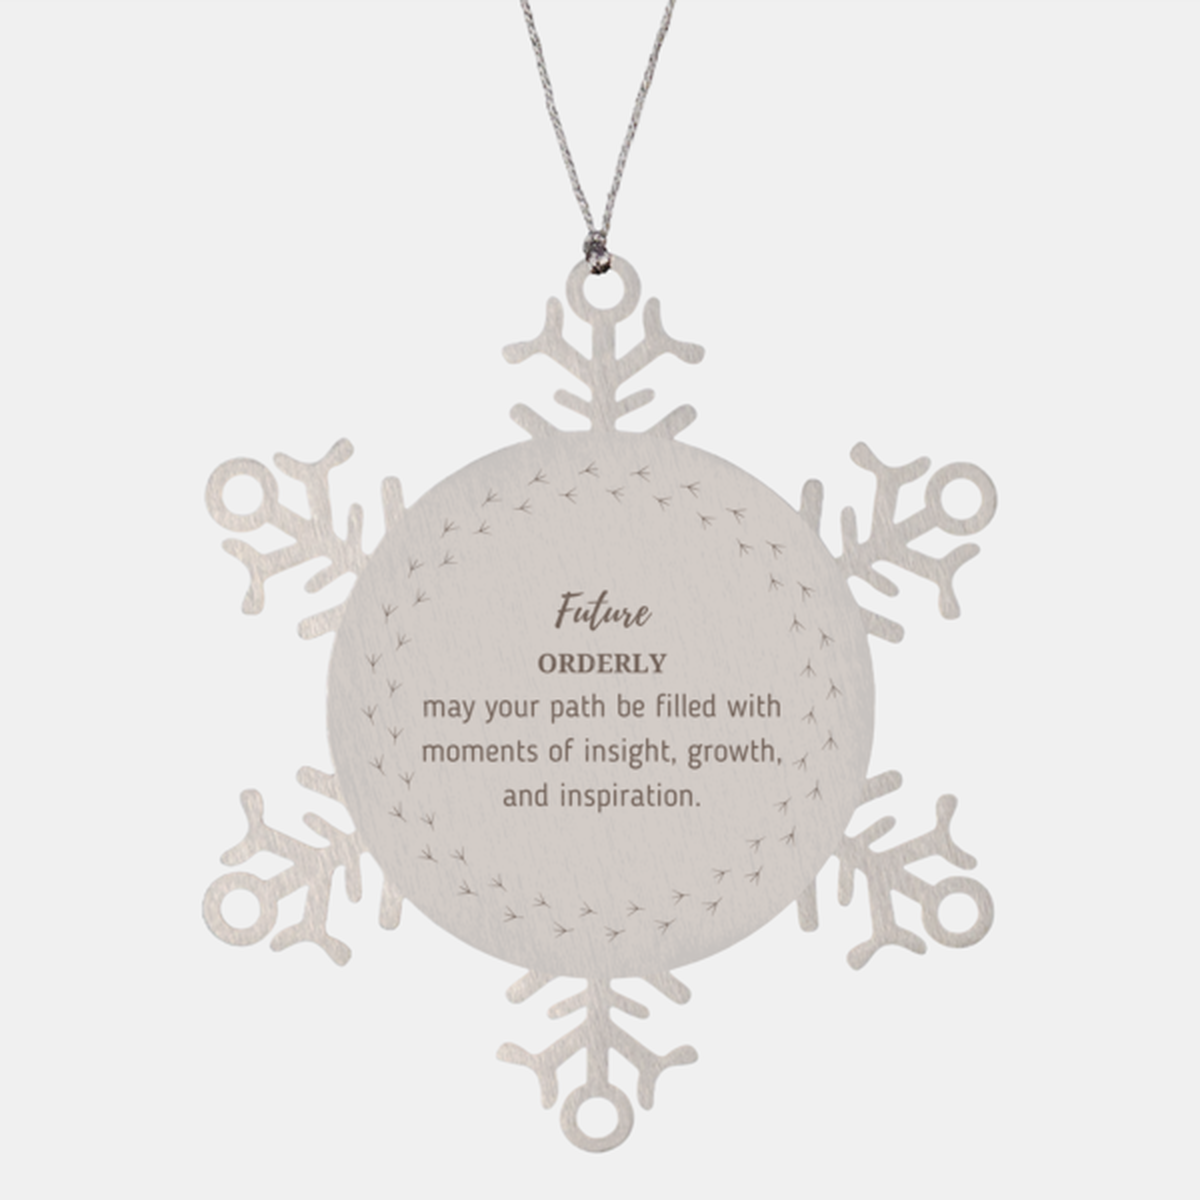 Future Orderly Gifts, May your path be filled with moments of insight, Graduation Gifts for New Orderly, Christmas Unique Snowflake Ornament For Men, Women, Friends